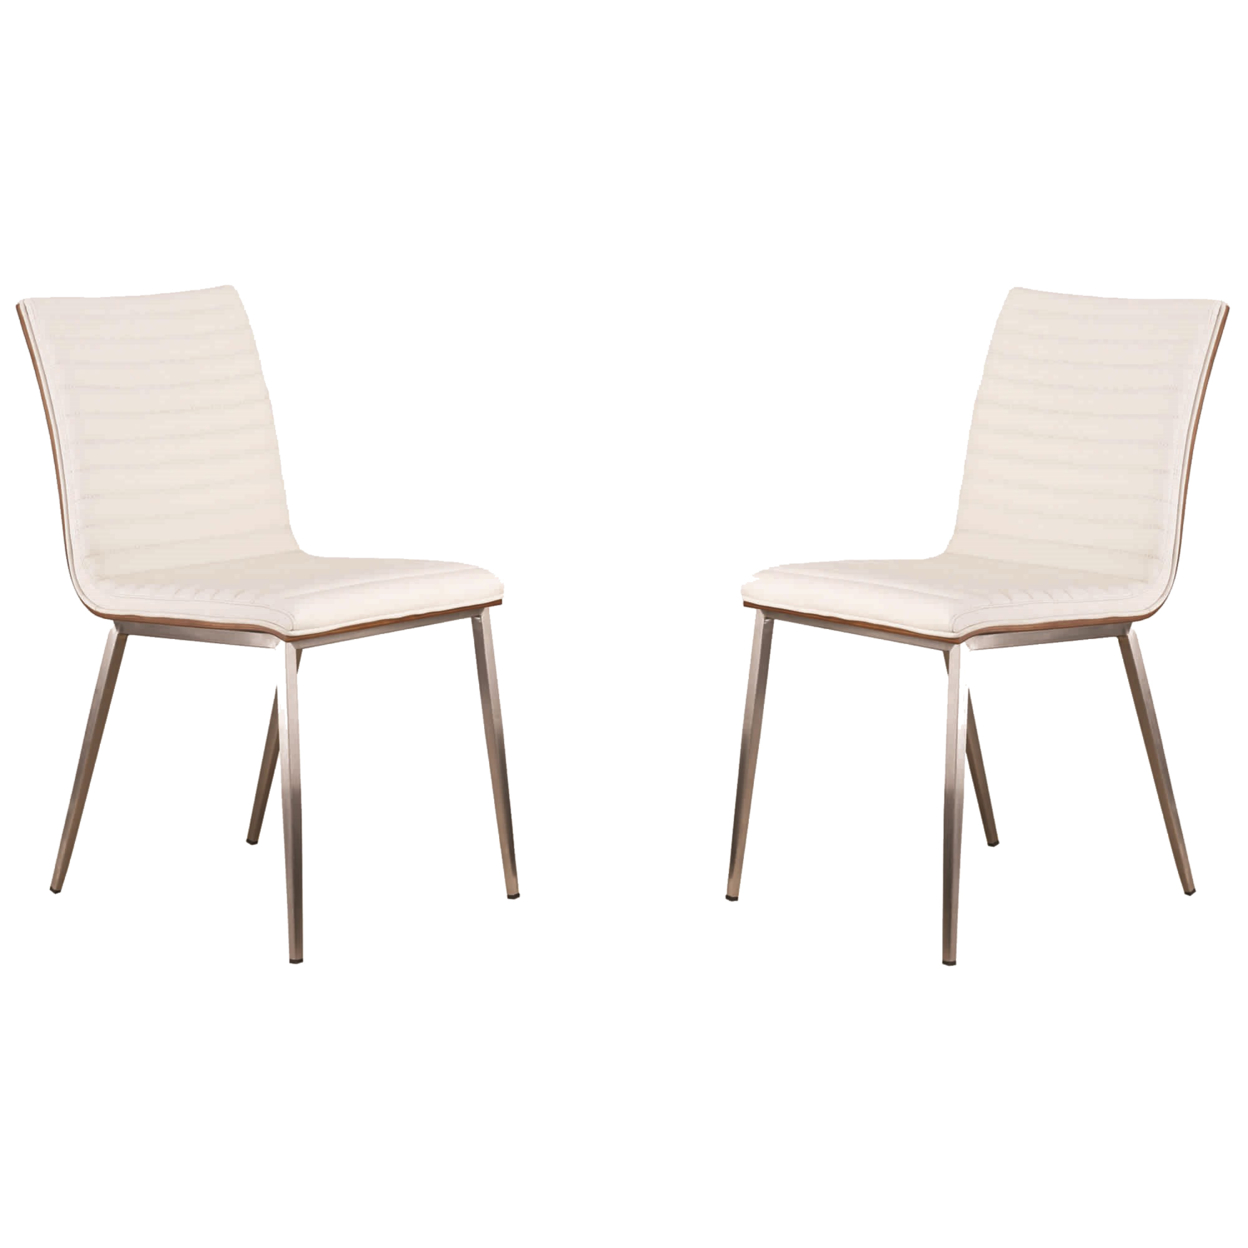 Horizontally Tufted Leatherette Dining Chair With Metal Legs,Set Of 2,White- Saltoro Sherpi